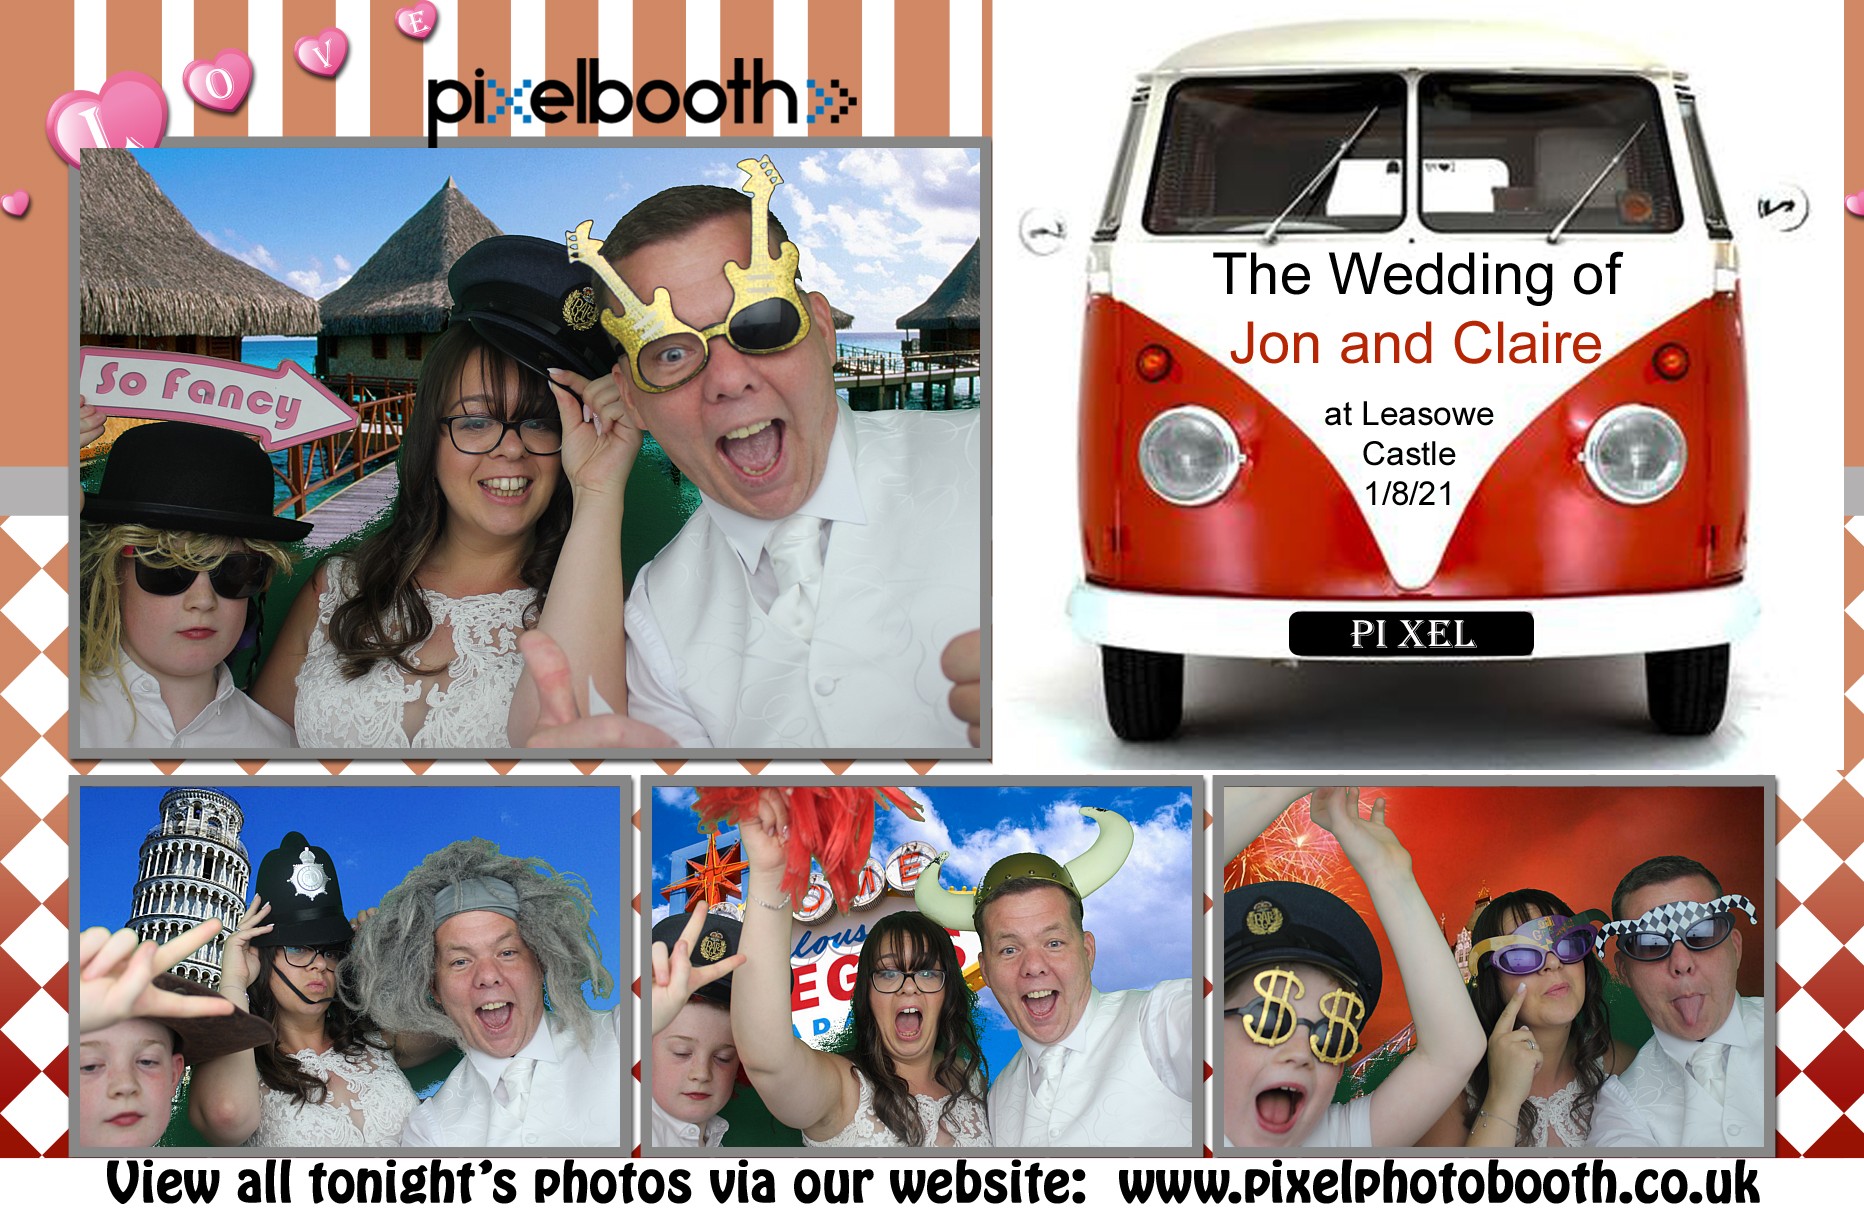 1st Aug 2021: John and Claire's Wedding at Leasowe Castle